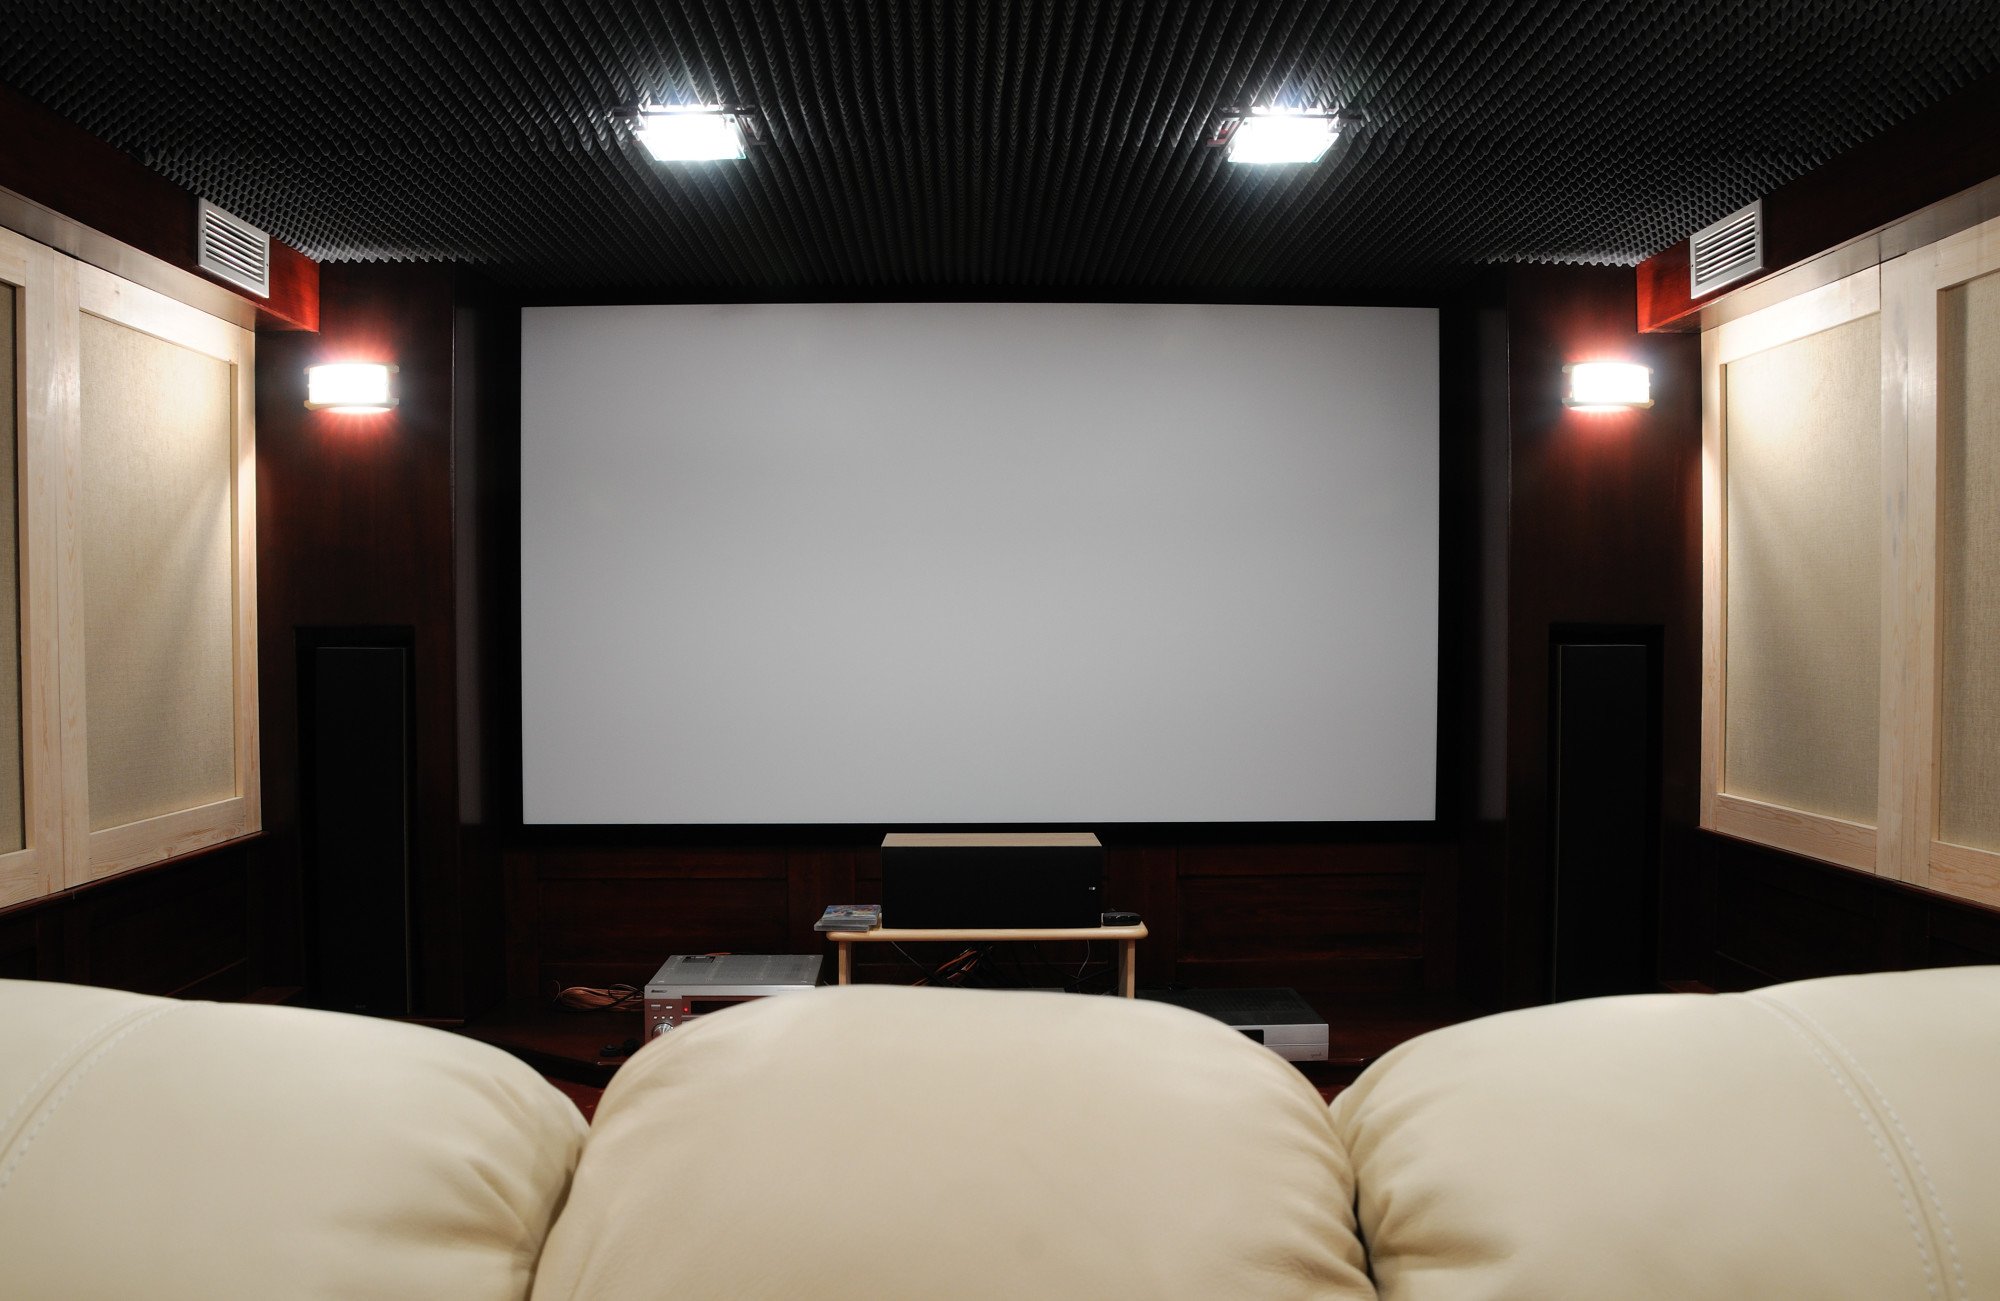 A multi-channel home theater can dramatically change the way you experience films and shows. Learn how to set one up here!